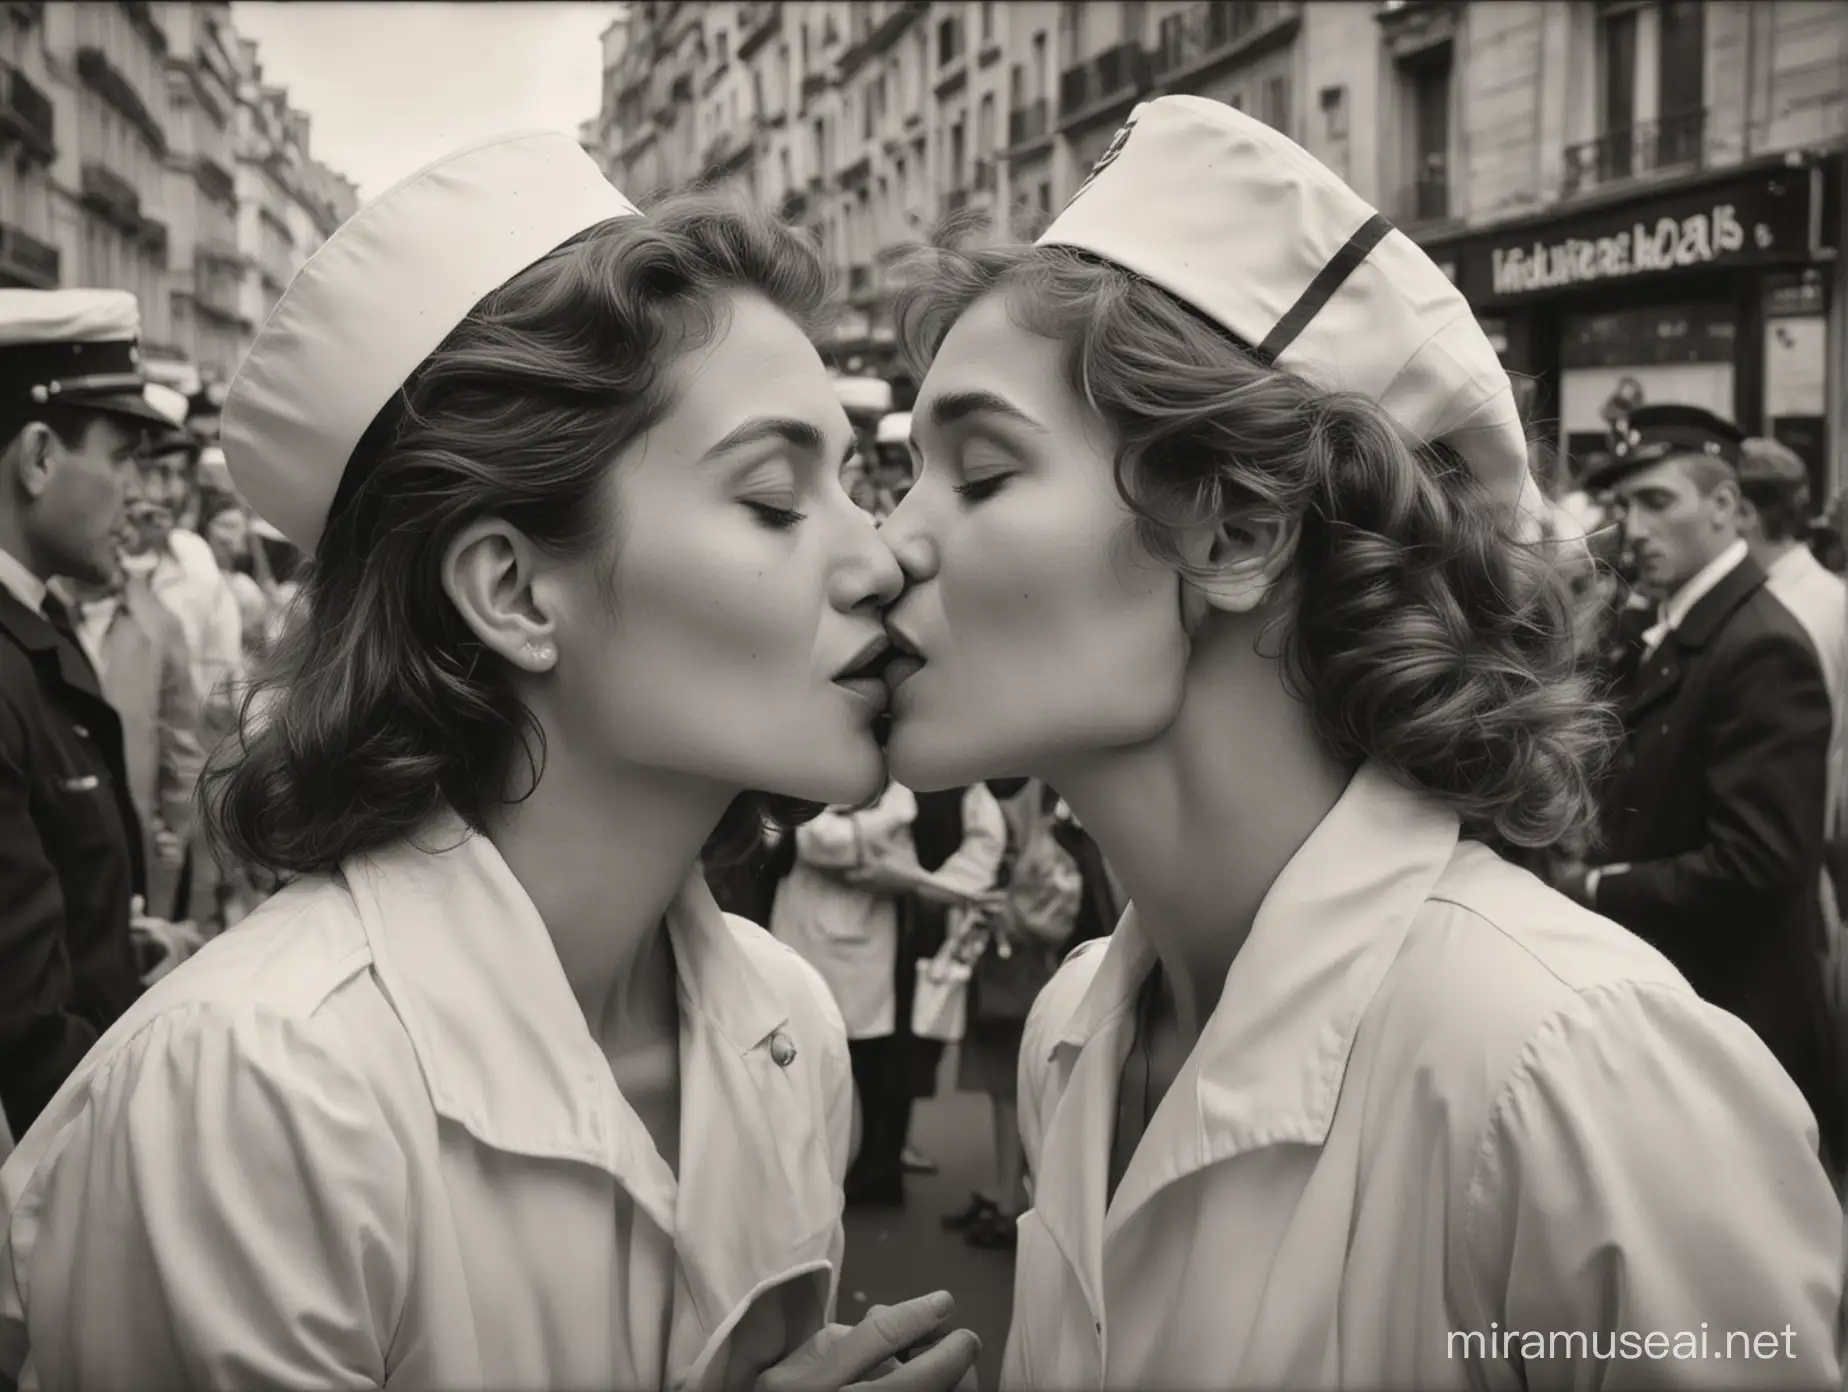 Recreate the kiss between a sailor and a nurse celebrating the end of World War II among dozens of people celebrating in Paris. Black and white, 4K polaroid 